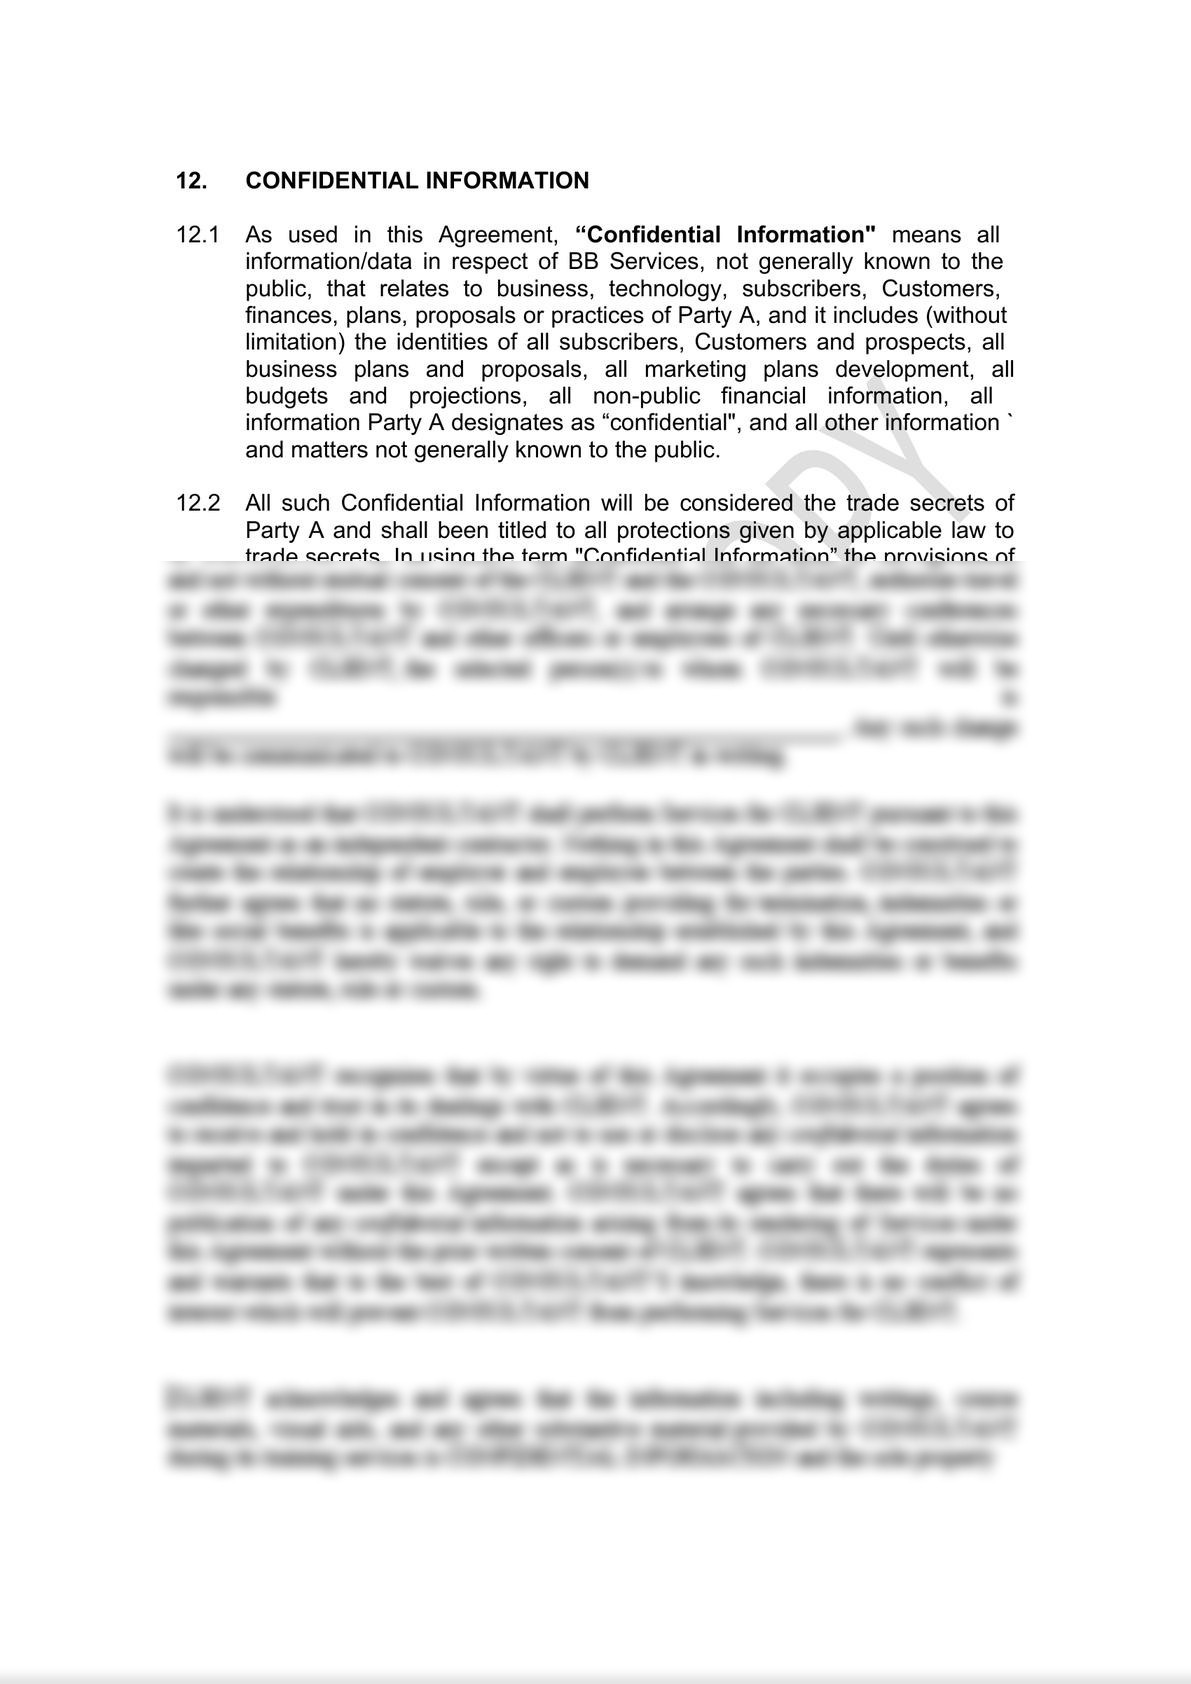 Direct Agency Agreement Draft-7